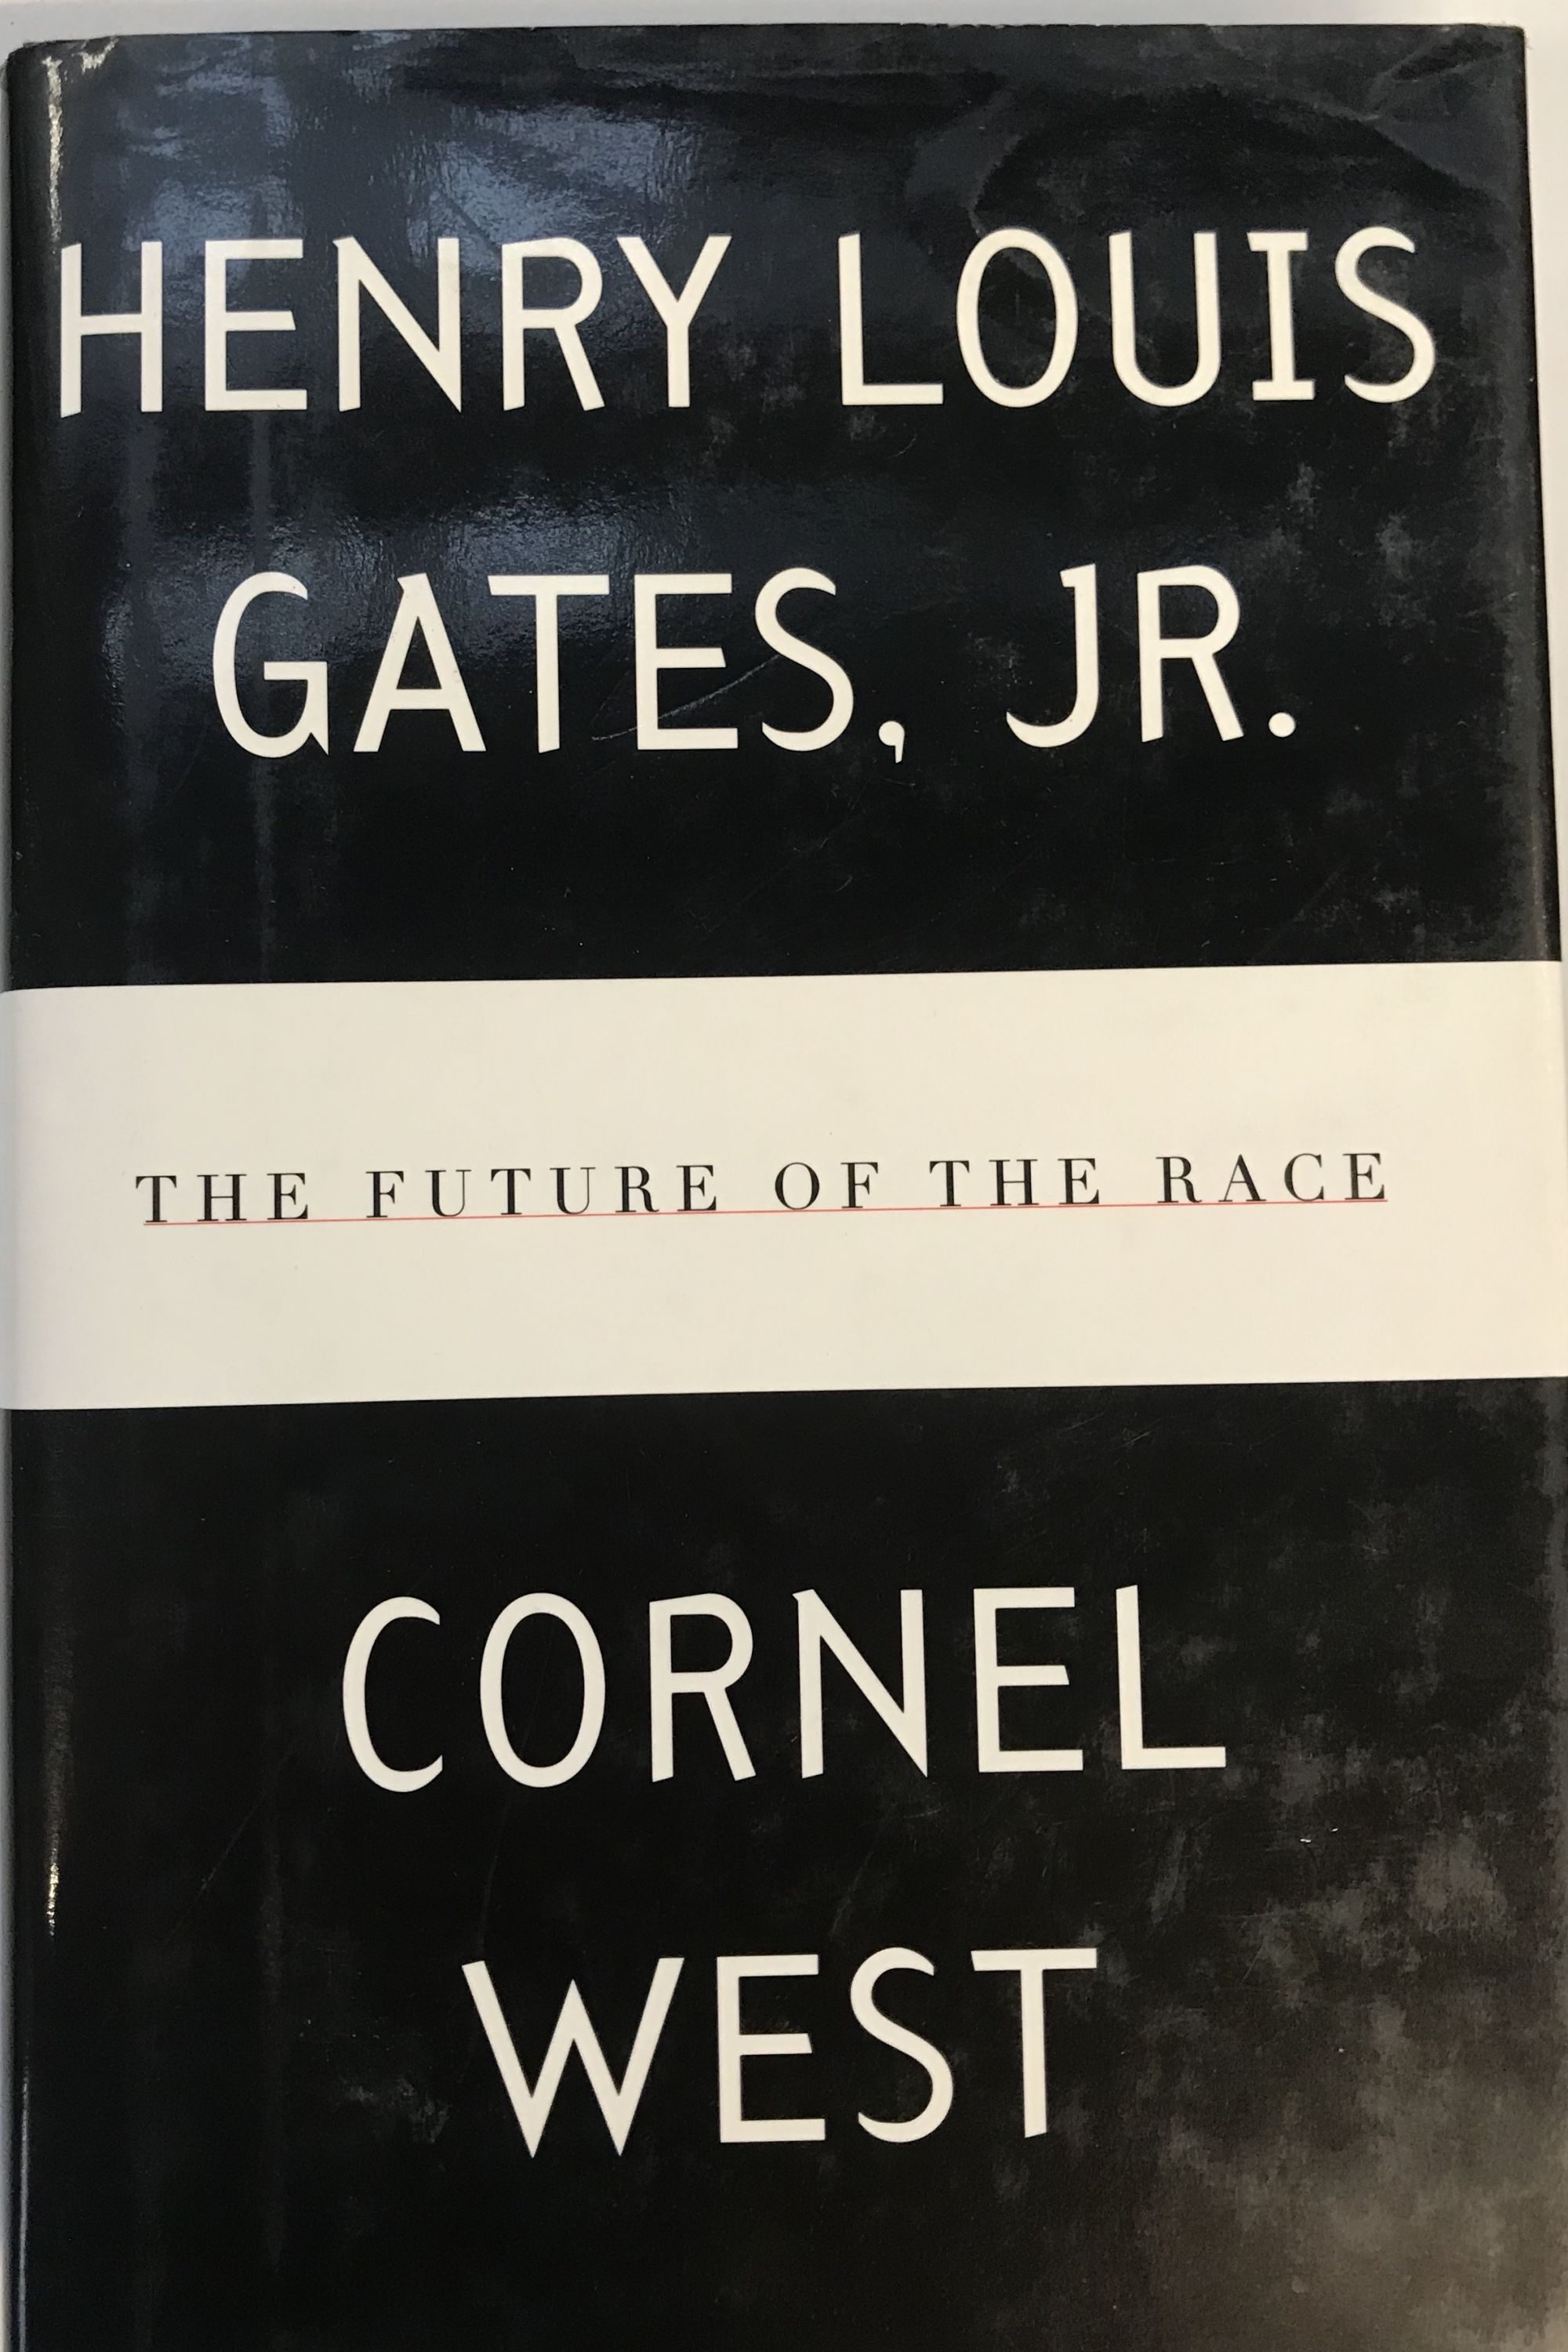 The Future of the Race - GATES, JR., Henry Louis and WEST, Cornel